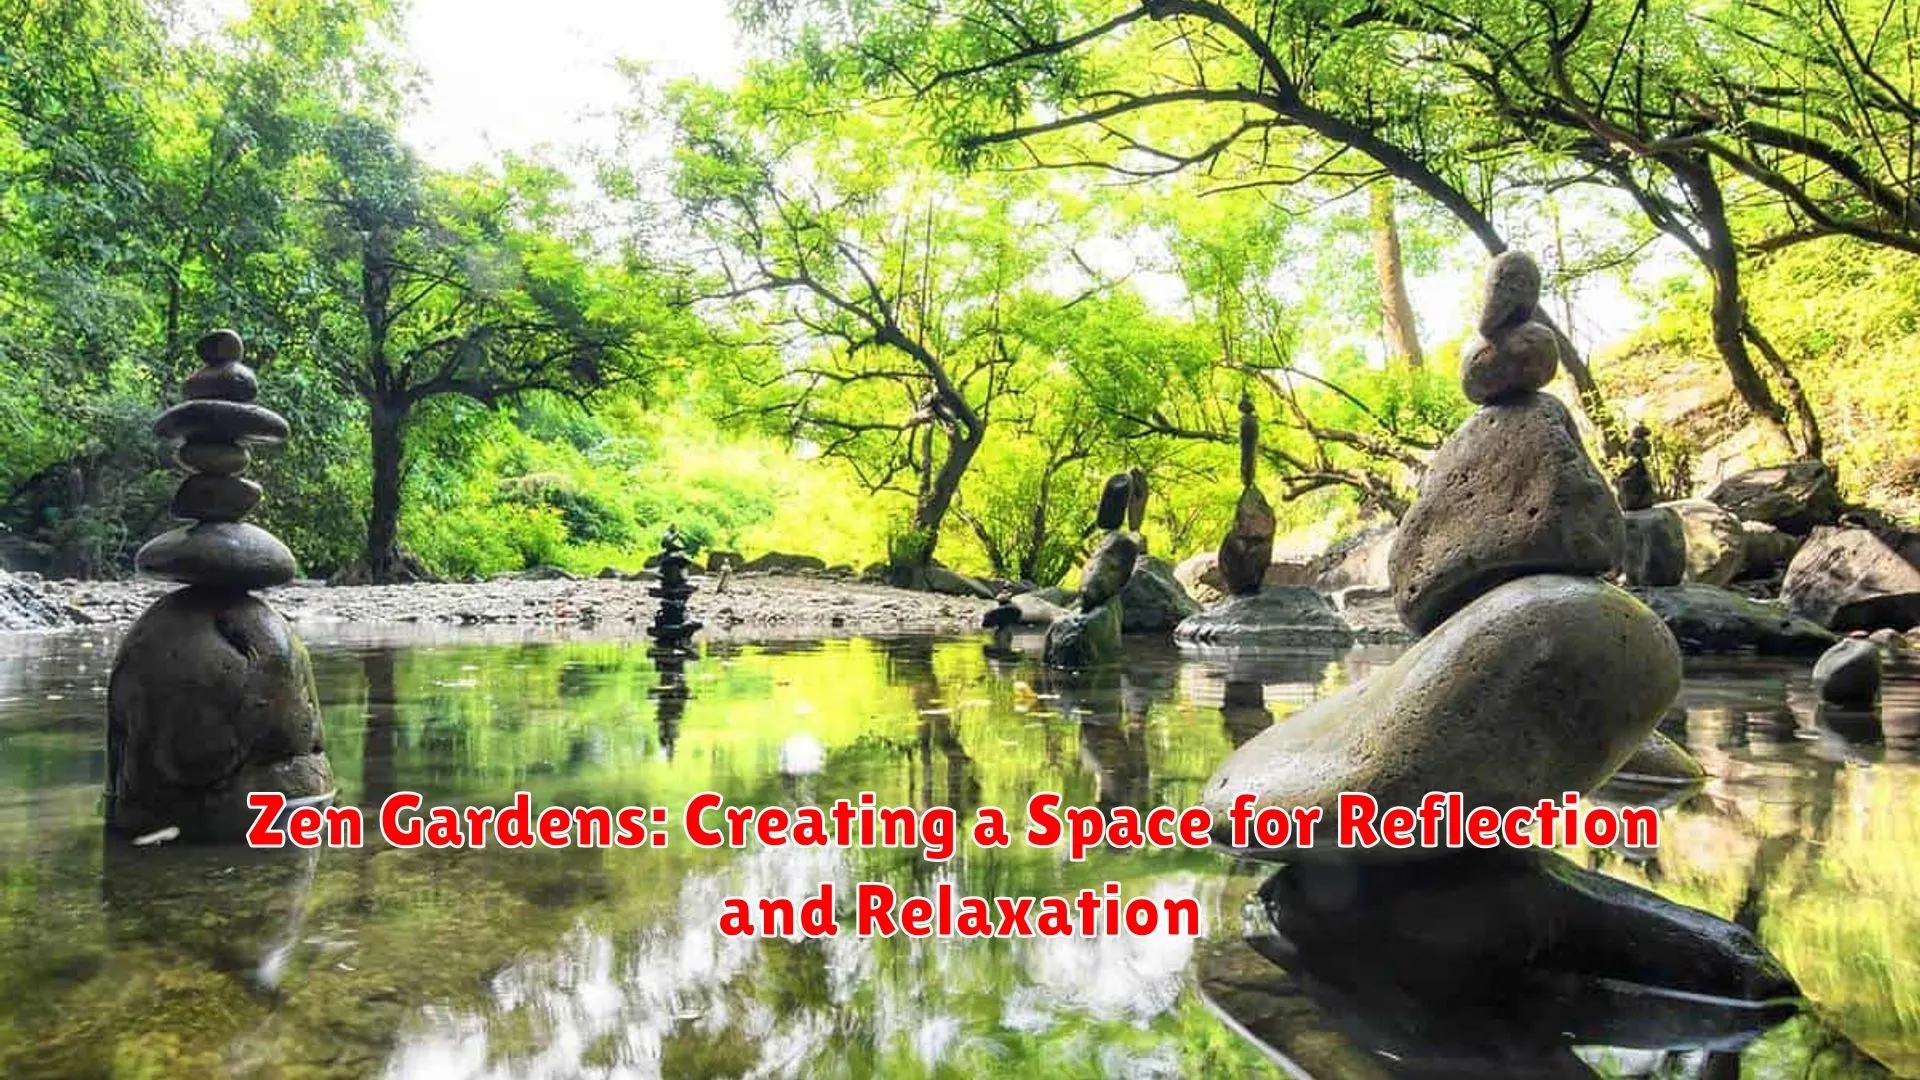 Zen Gardens: Creating a Space for Reflection and Relaxation